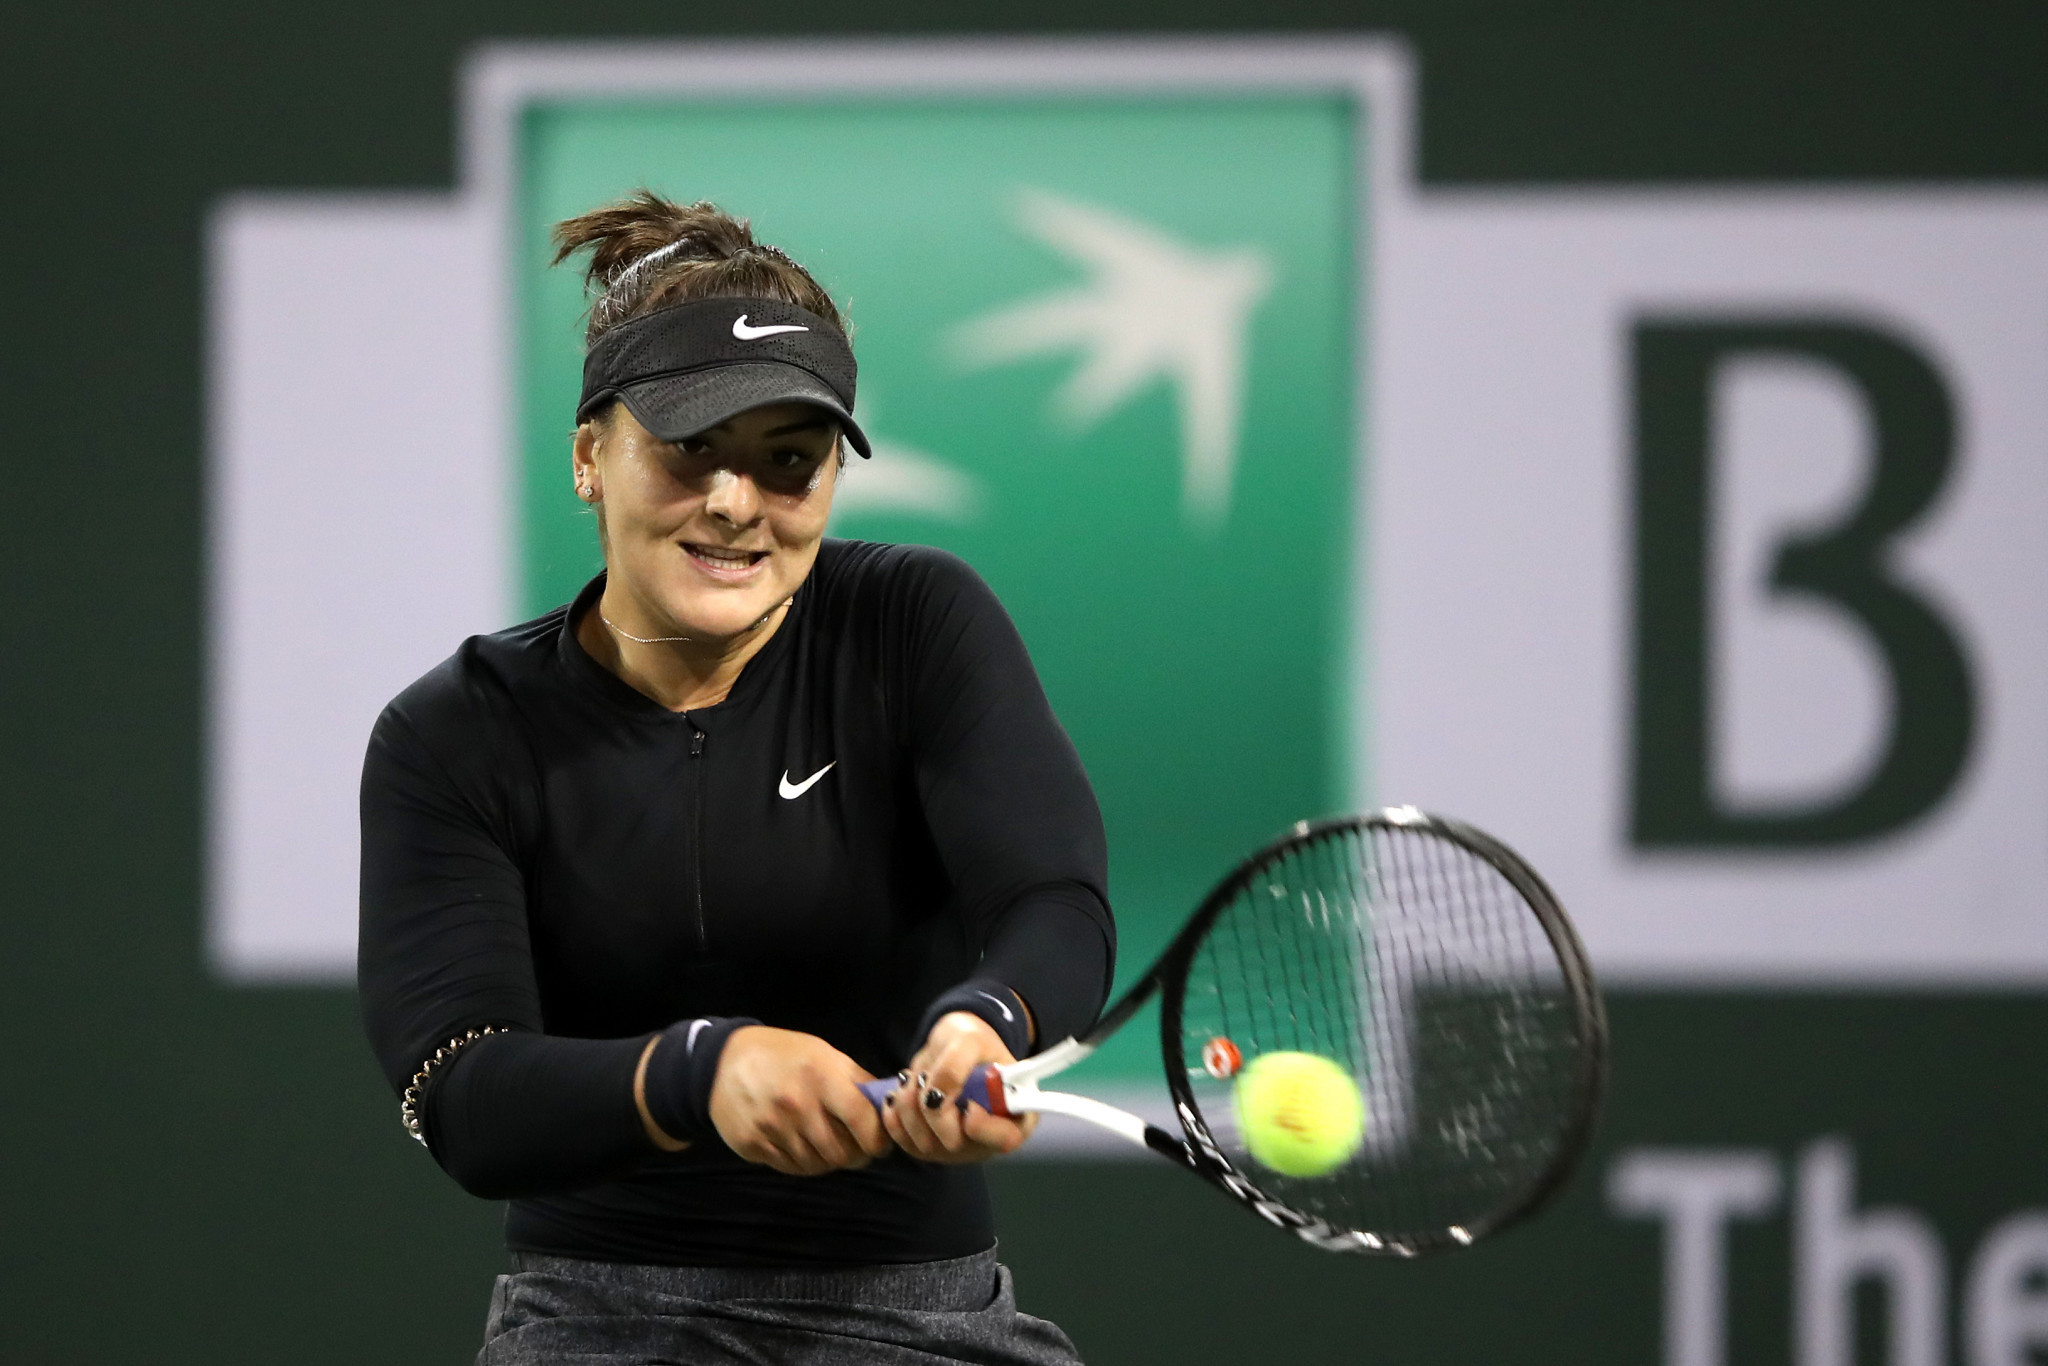  Andreescu becomes first wildcard to reach Indian Wells women's final